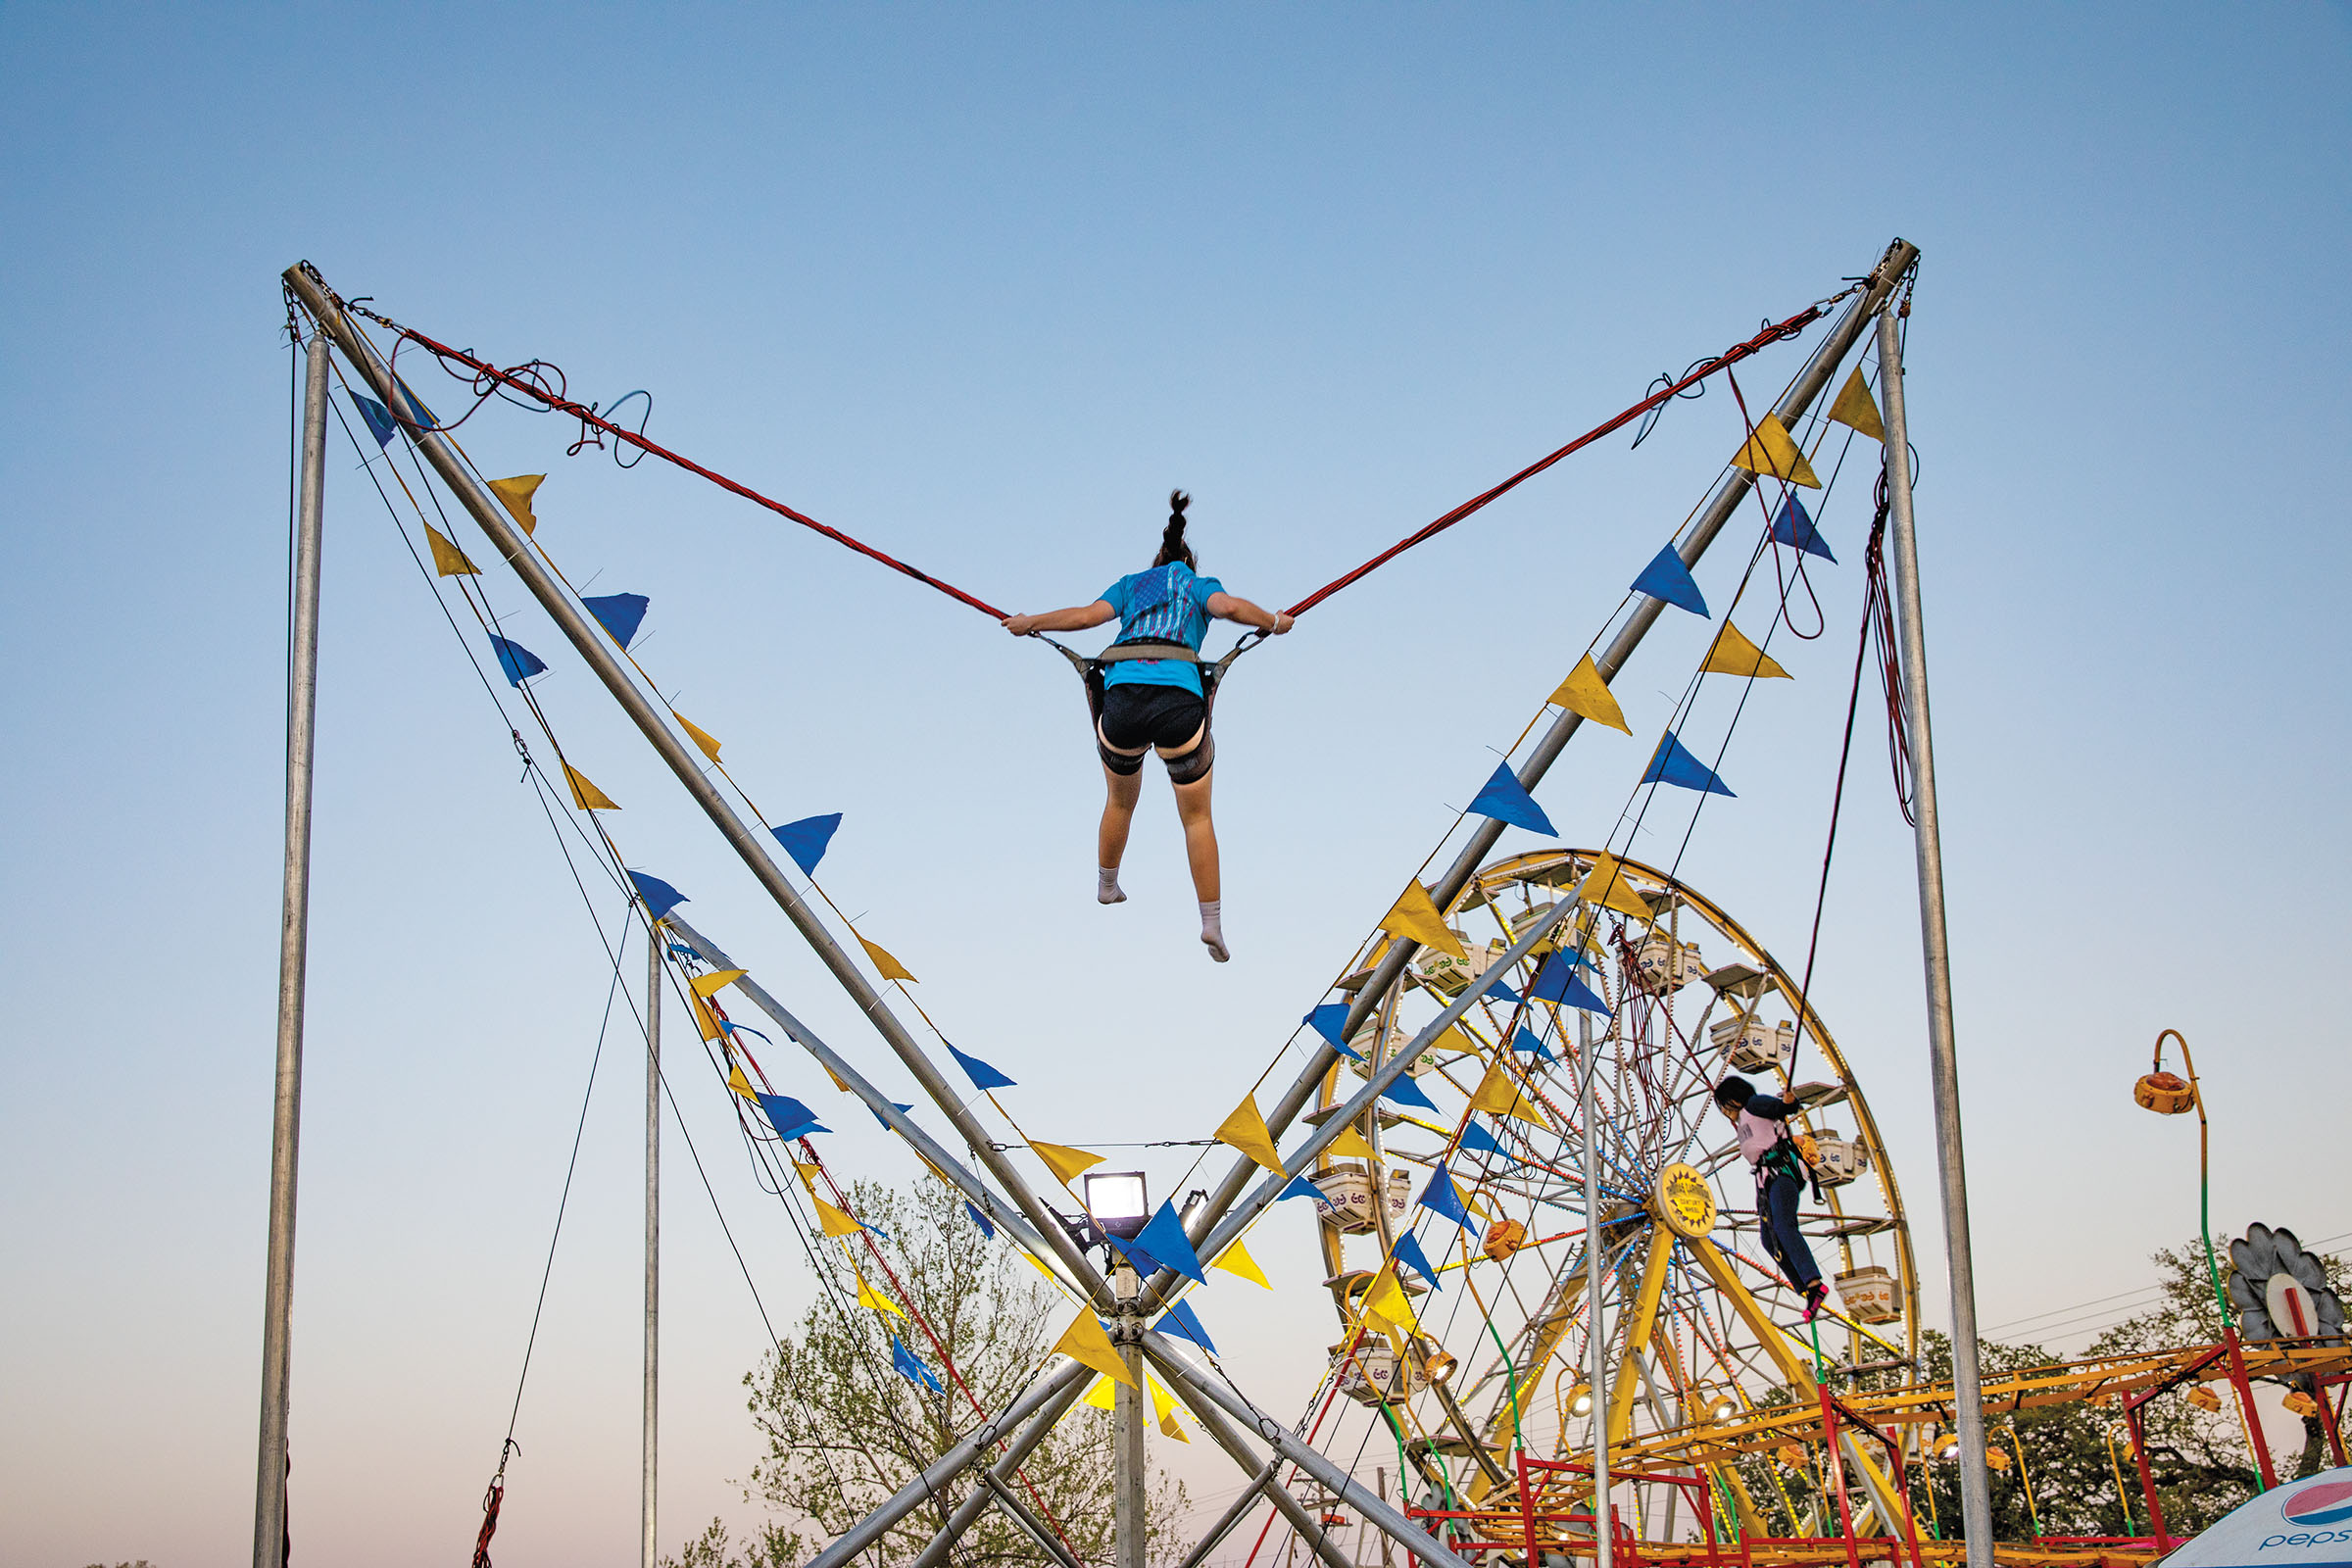 A person swings on a carnival ride